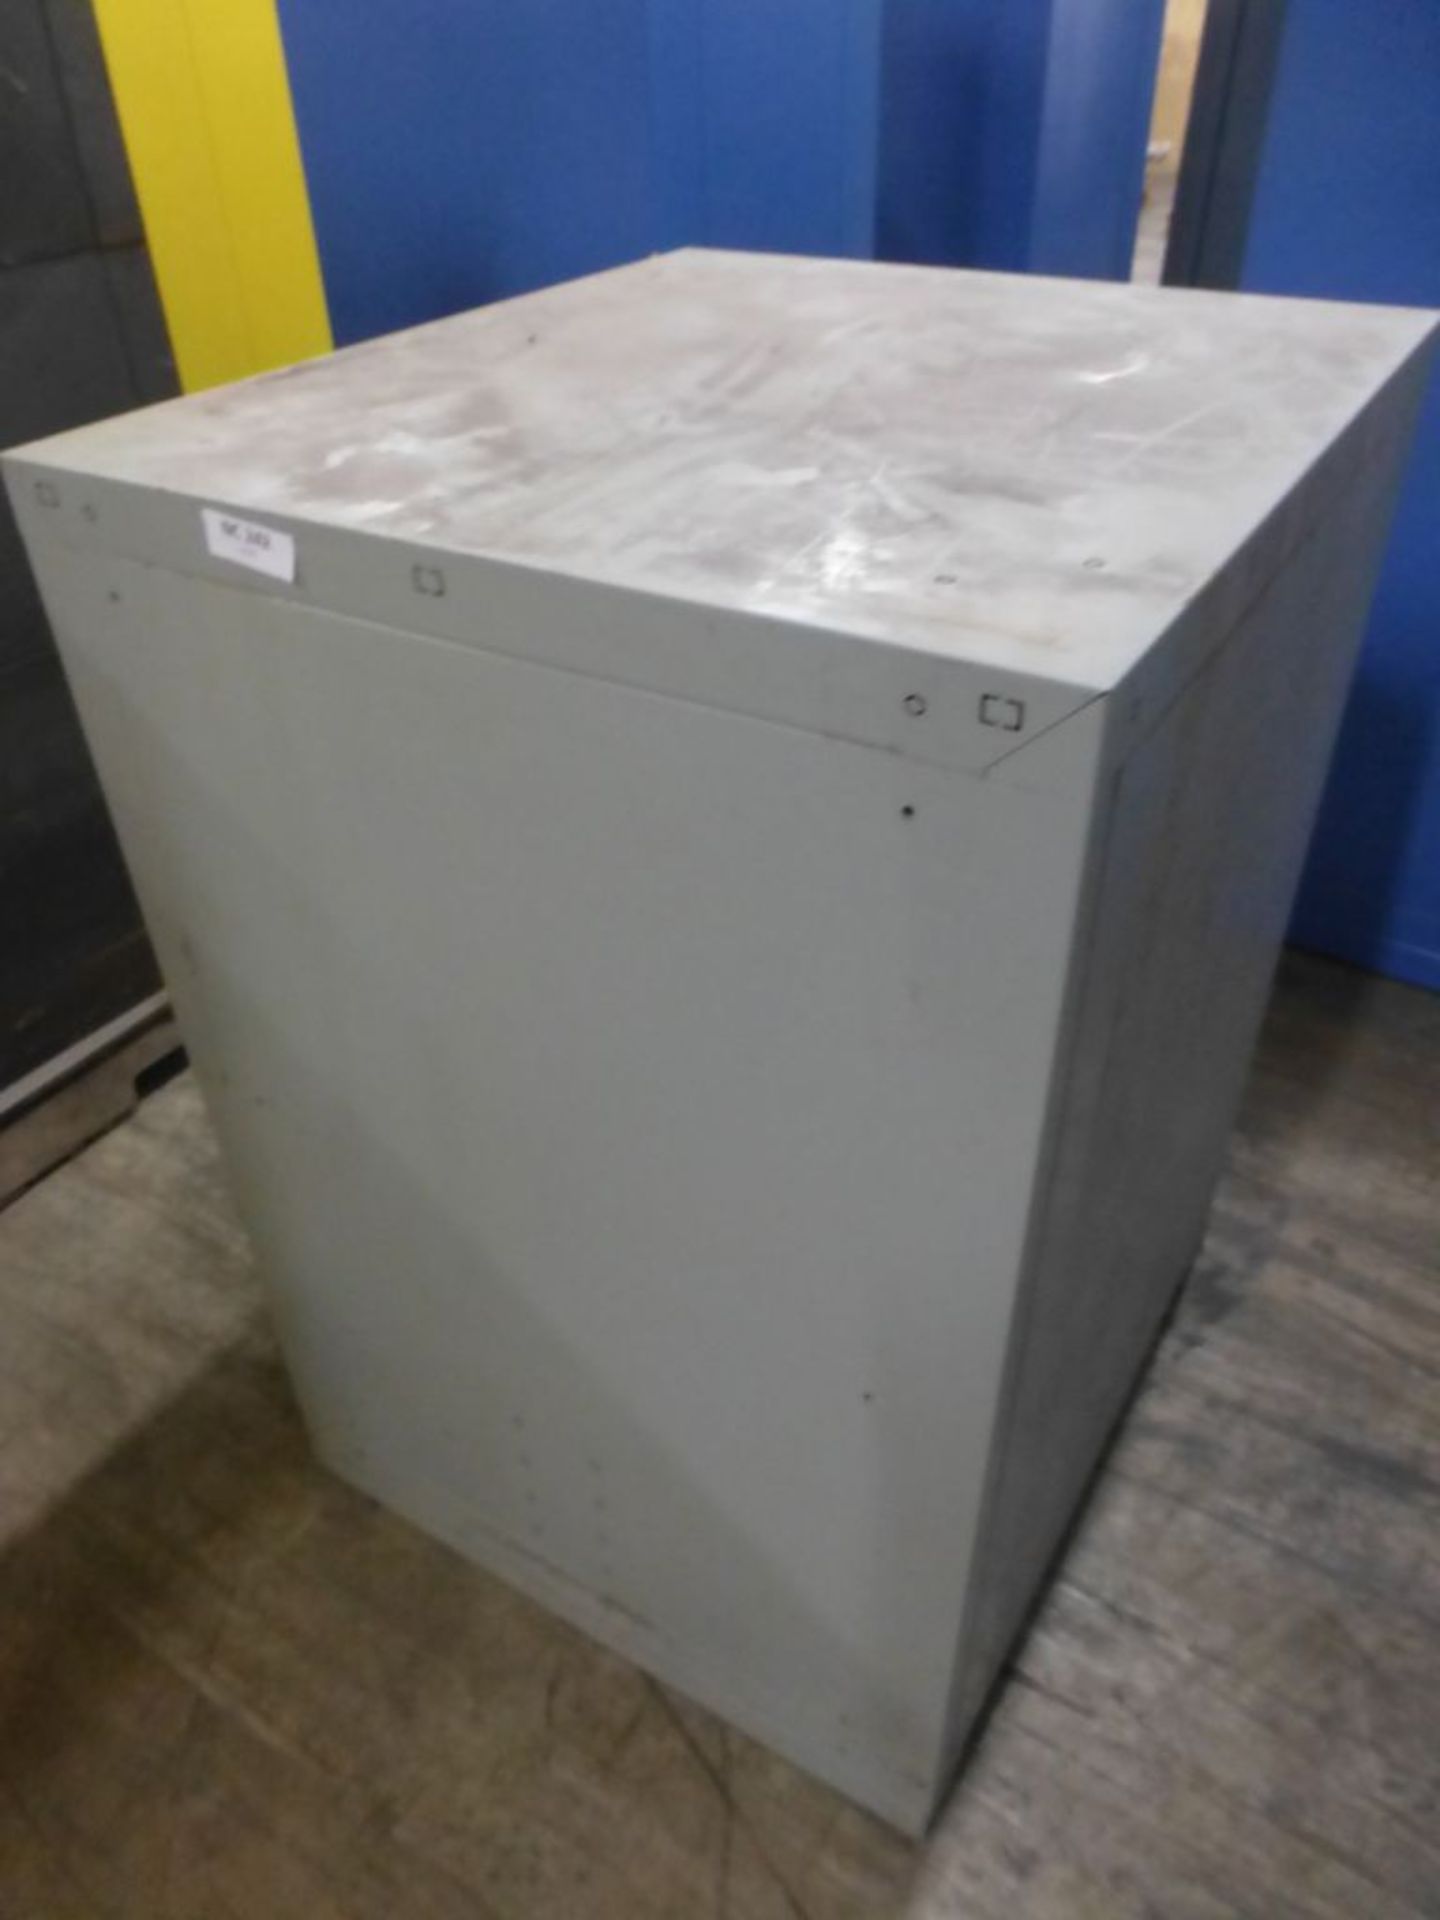 Global 8-Drawer Metal Cabinet - 30"W x 27"L x 40"H; Tag: 218684 - Image 4 of 8